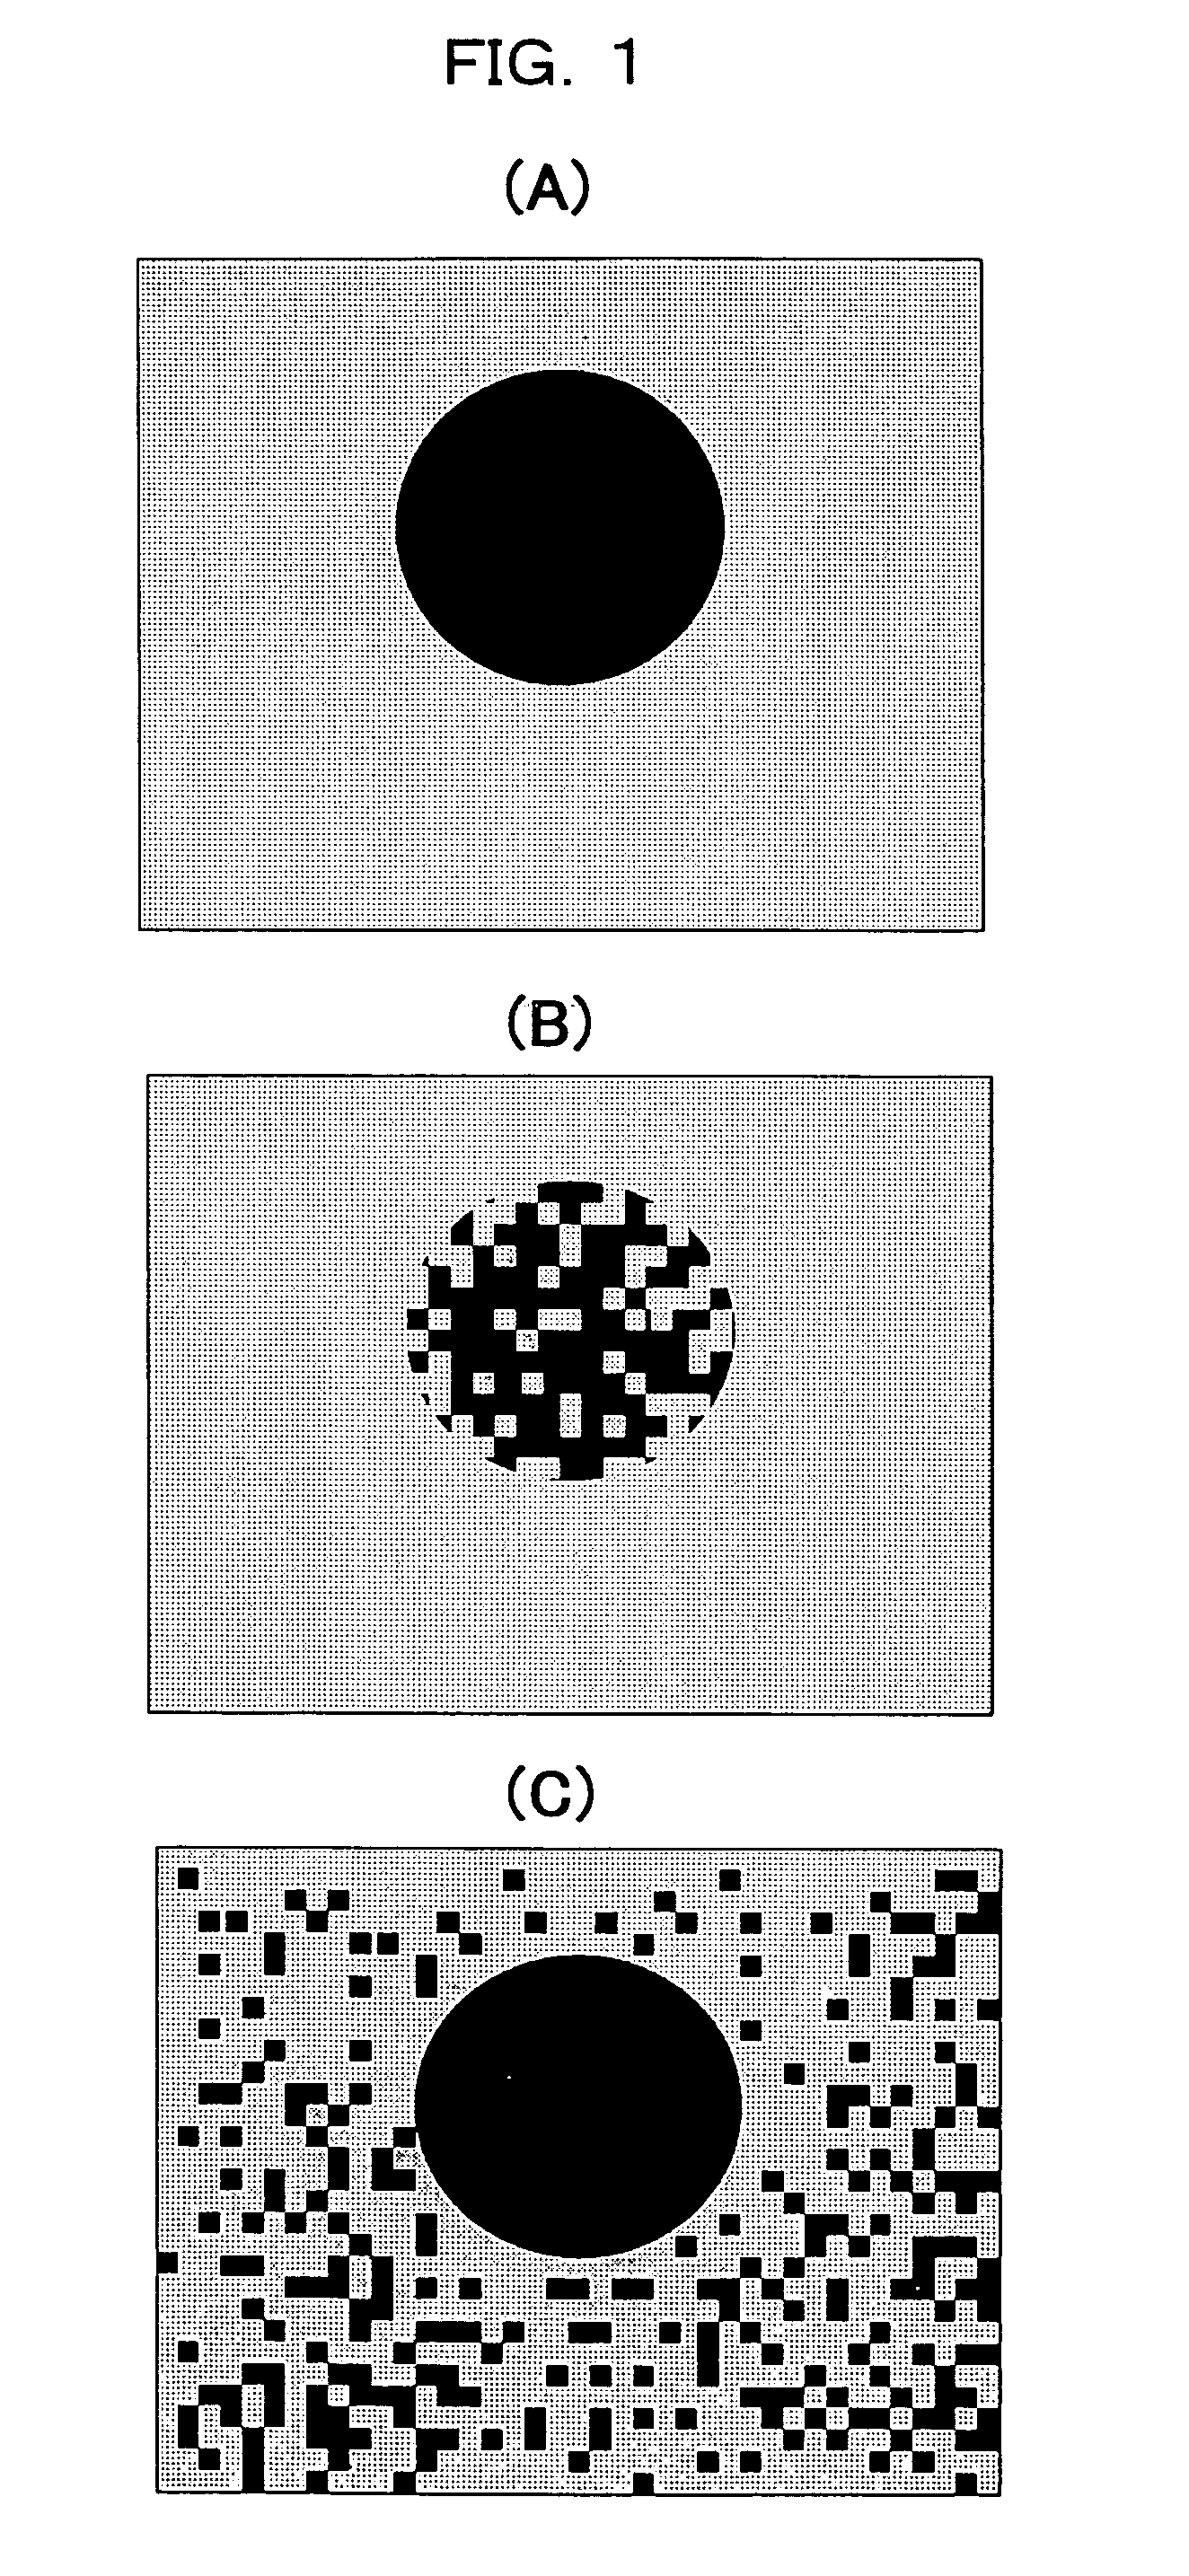 Method of displaying elastic image and diagnostic ultrasound system